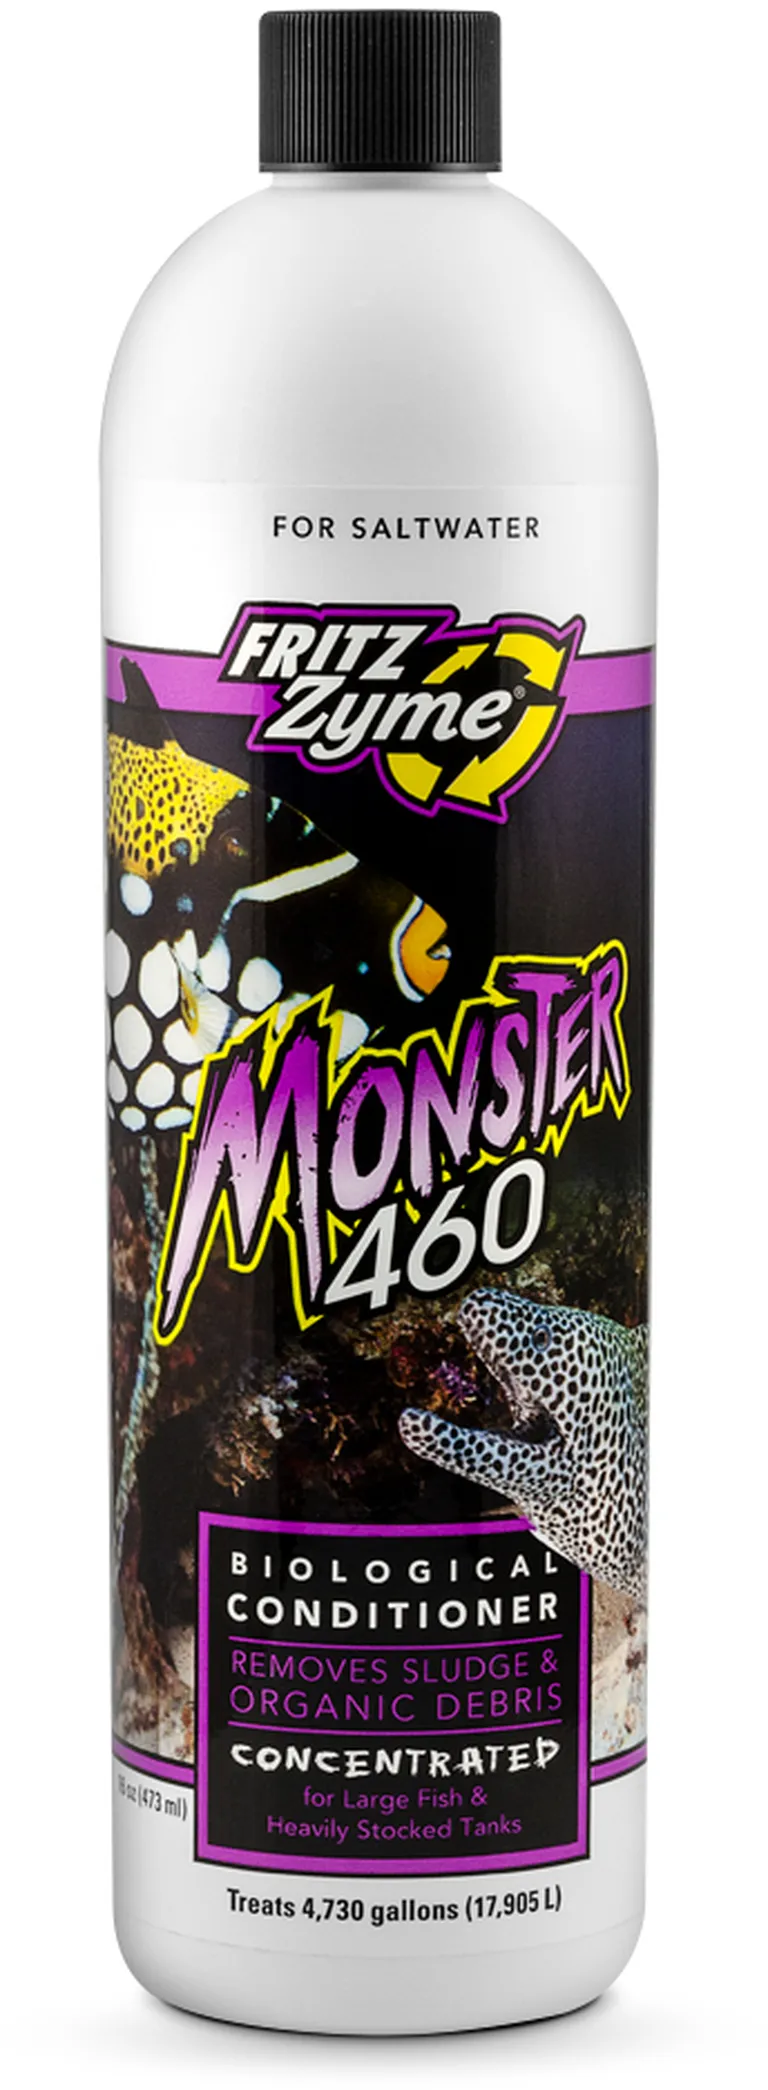 Fritz Aquatics Monster 460 Concentrated Biological Conditioner for Saltwater Photo 2